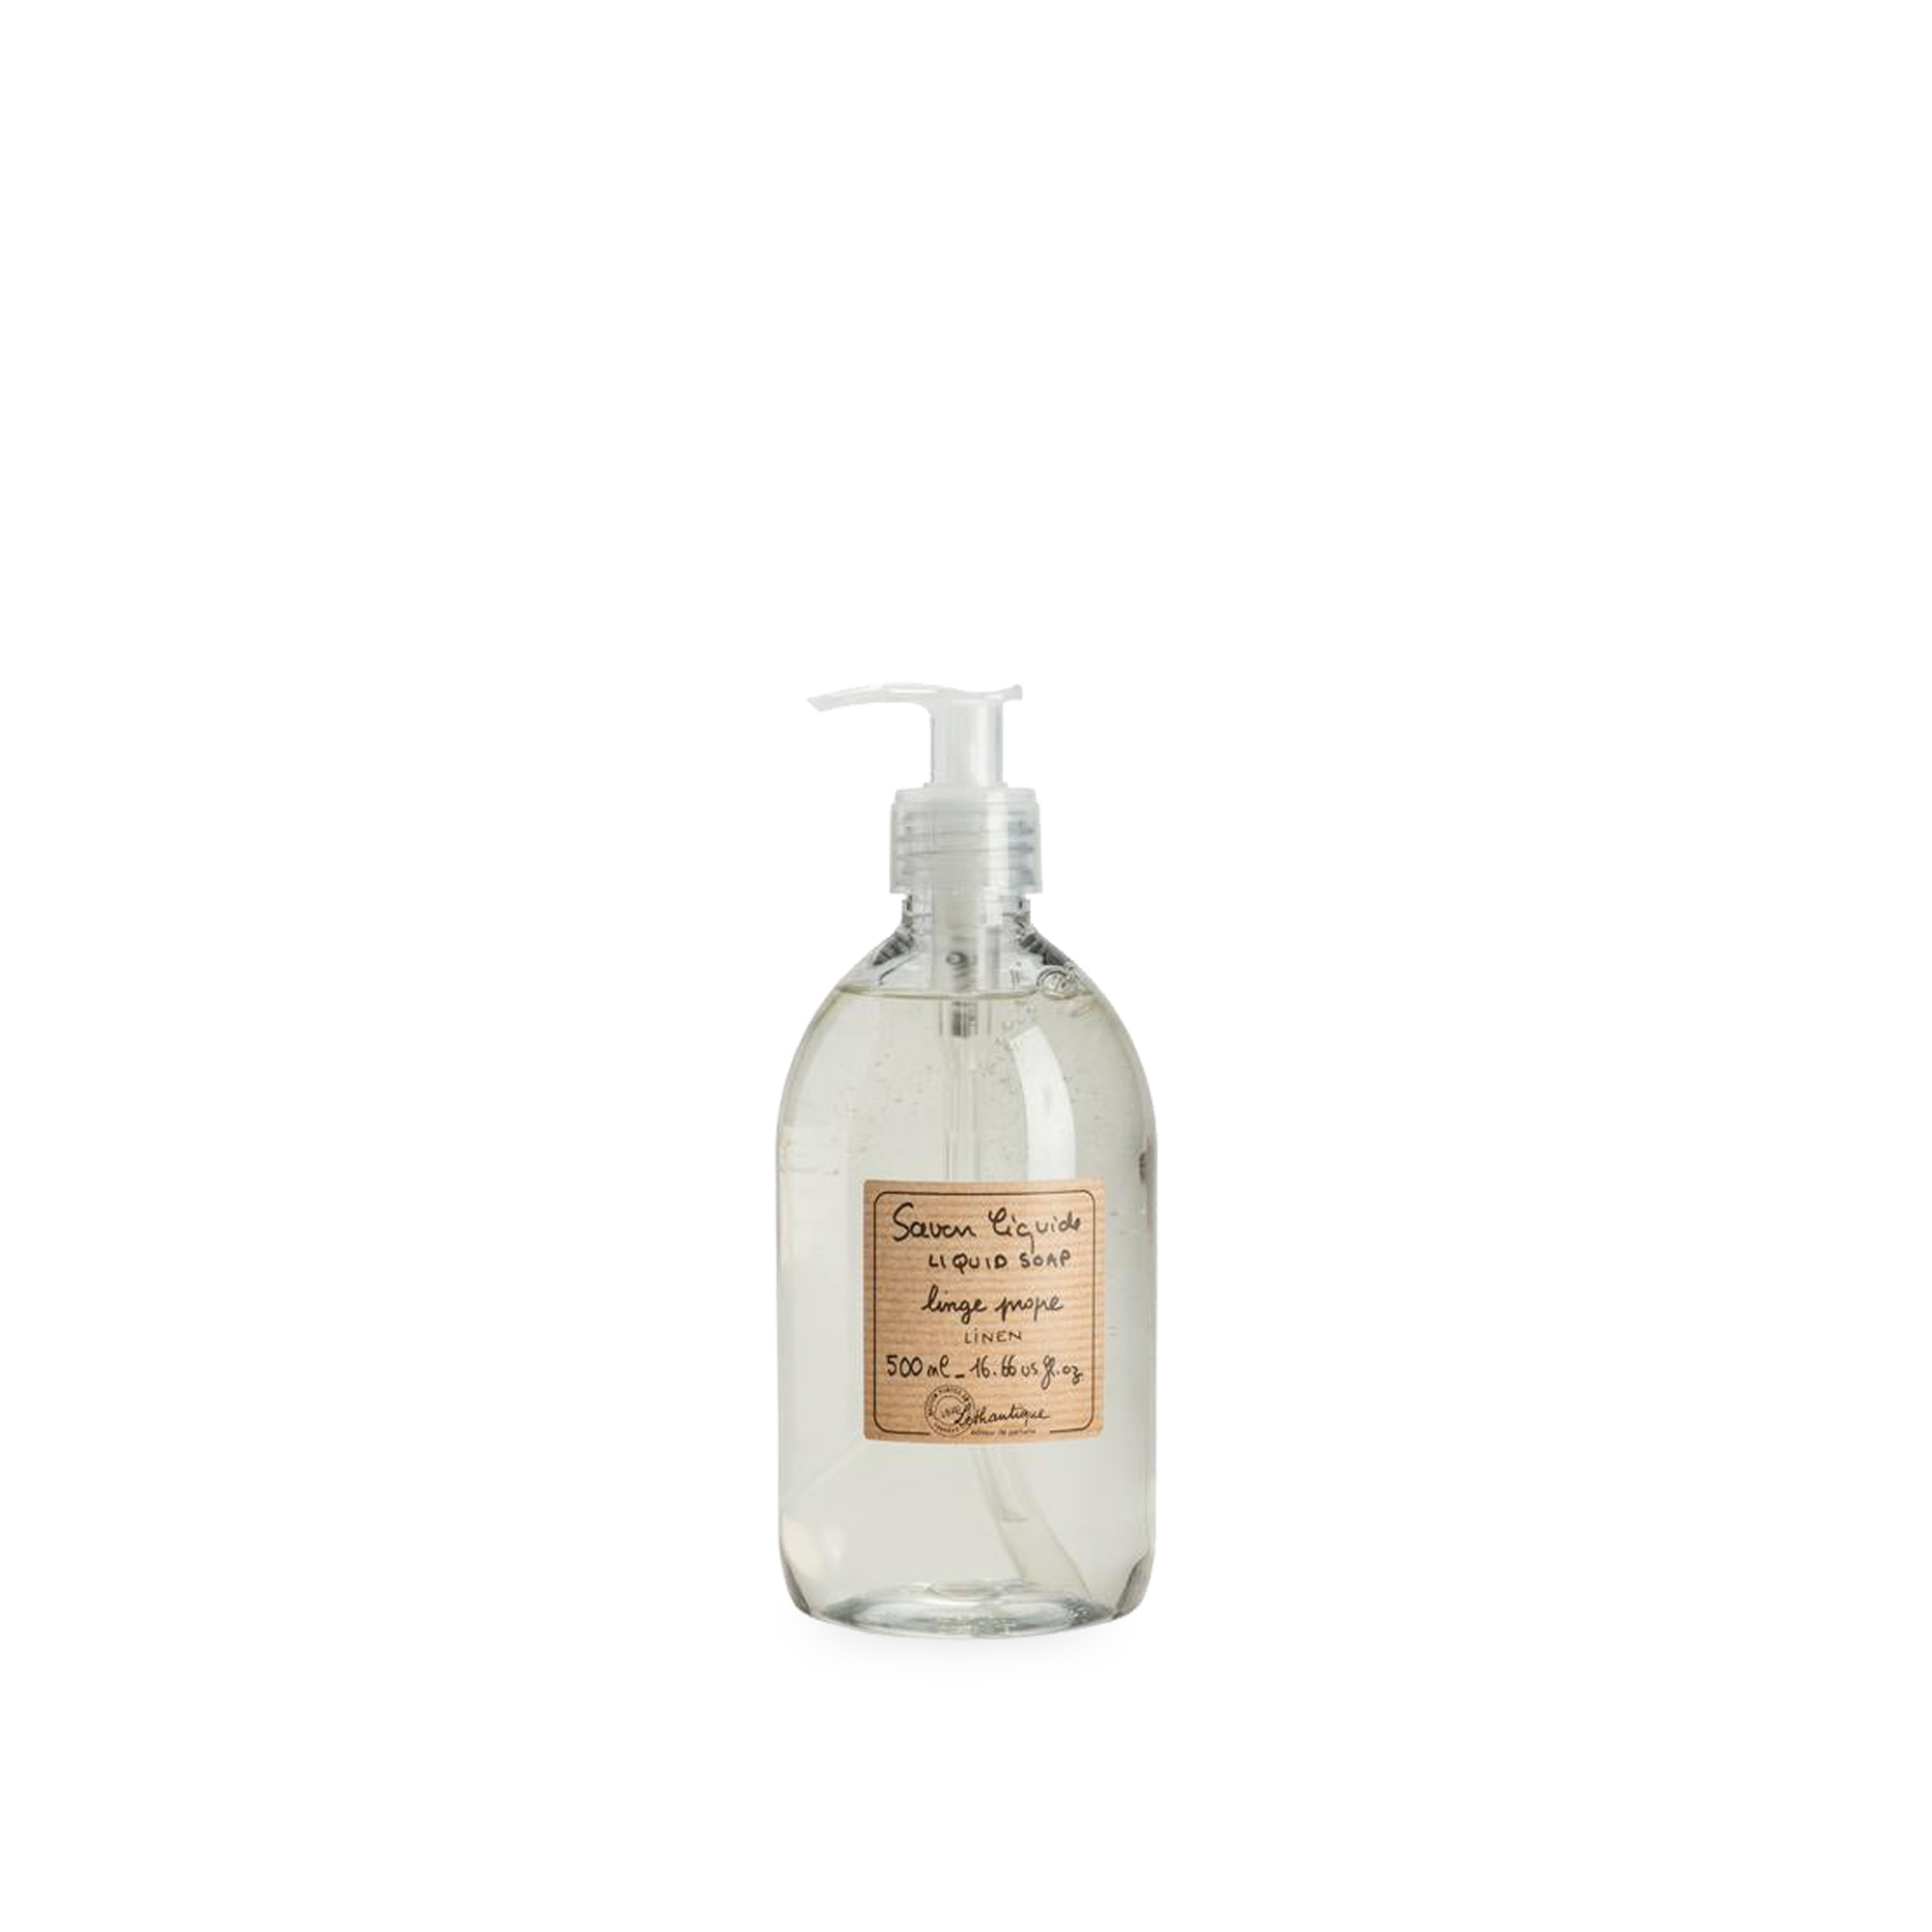 These French-made, Marseille-style liquid hand soaps are vegetable-based and can be used in either the kitchen or the bathroom.